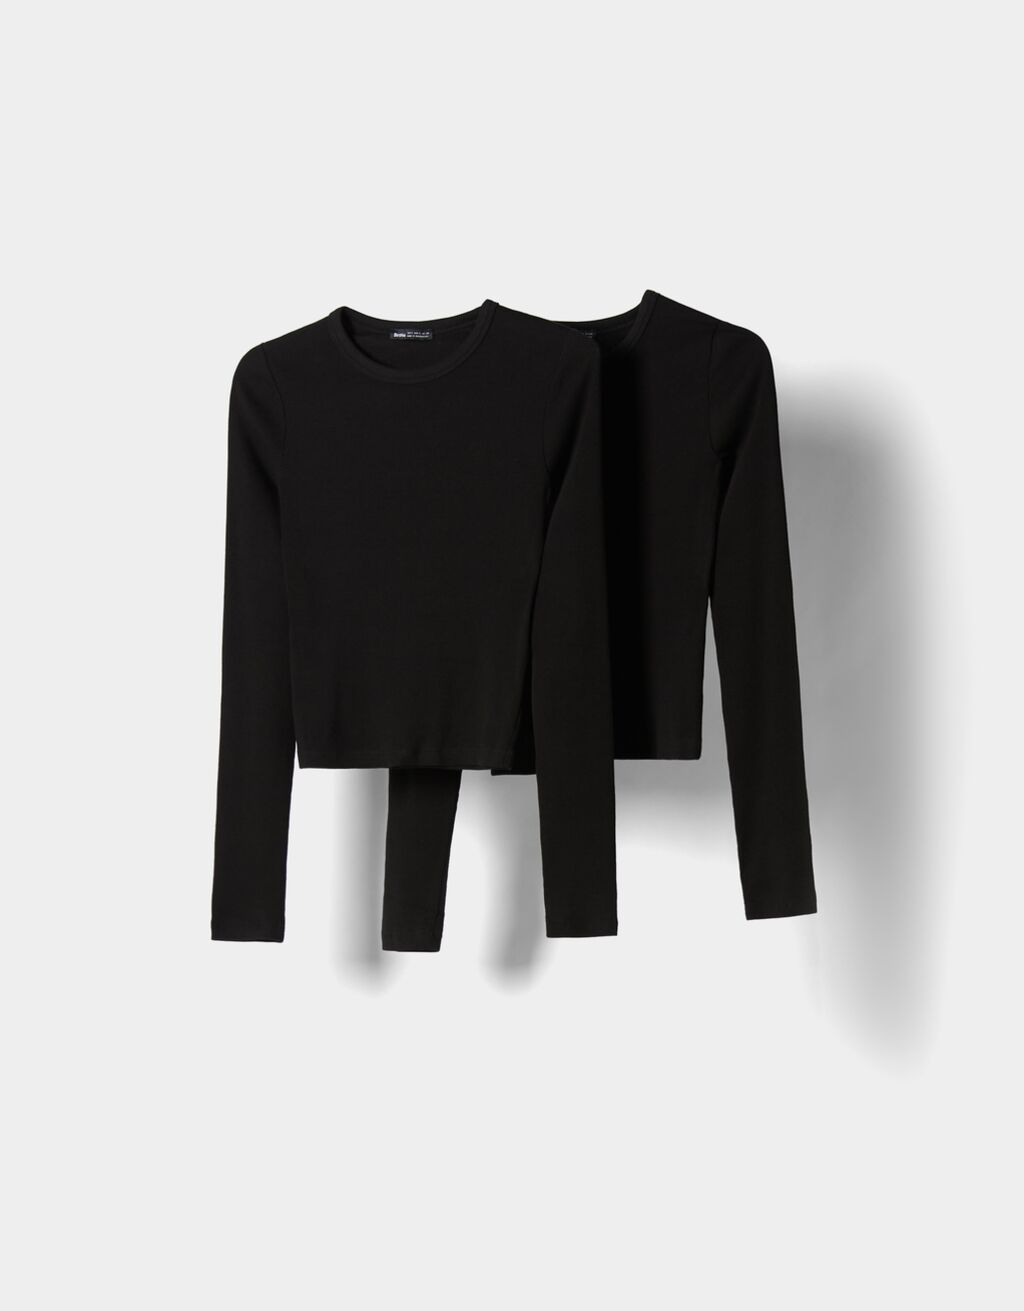 Pack of 2 long sleeve ribbed T-shirts.